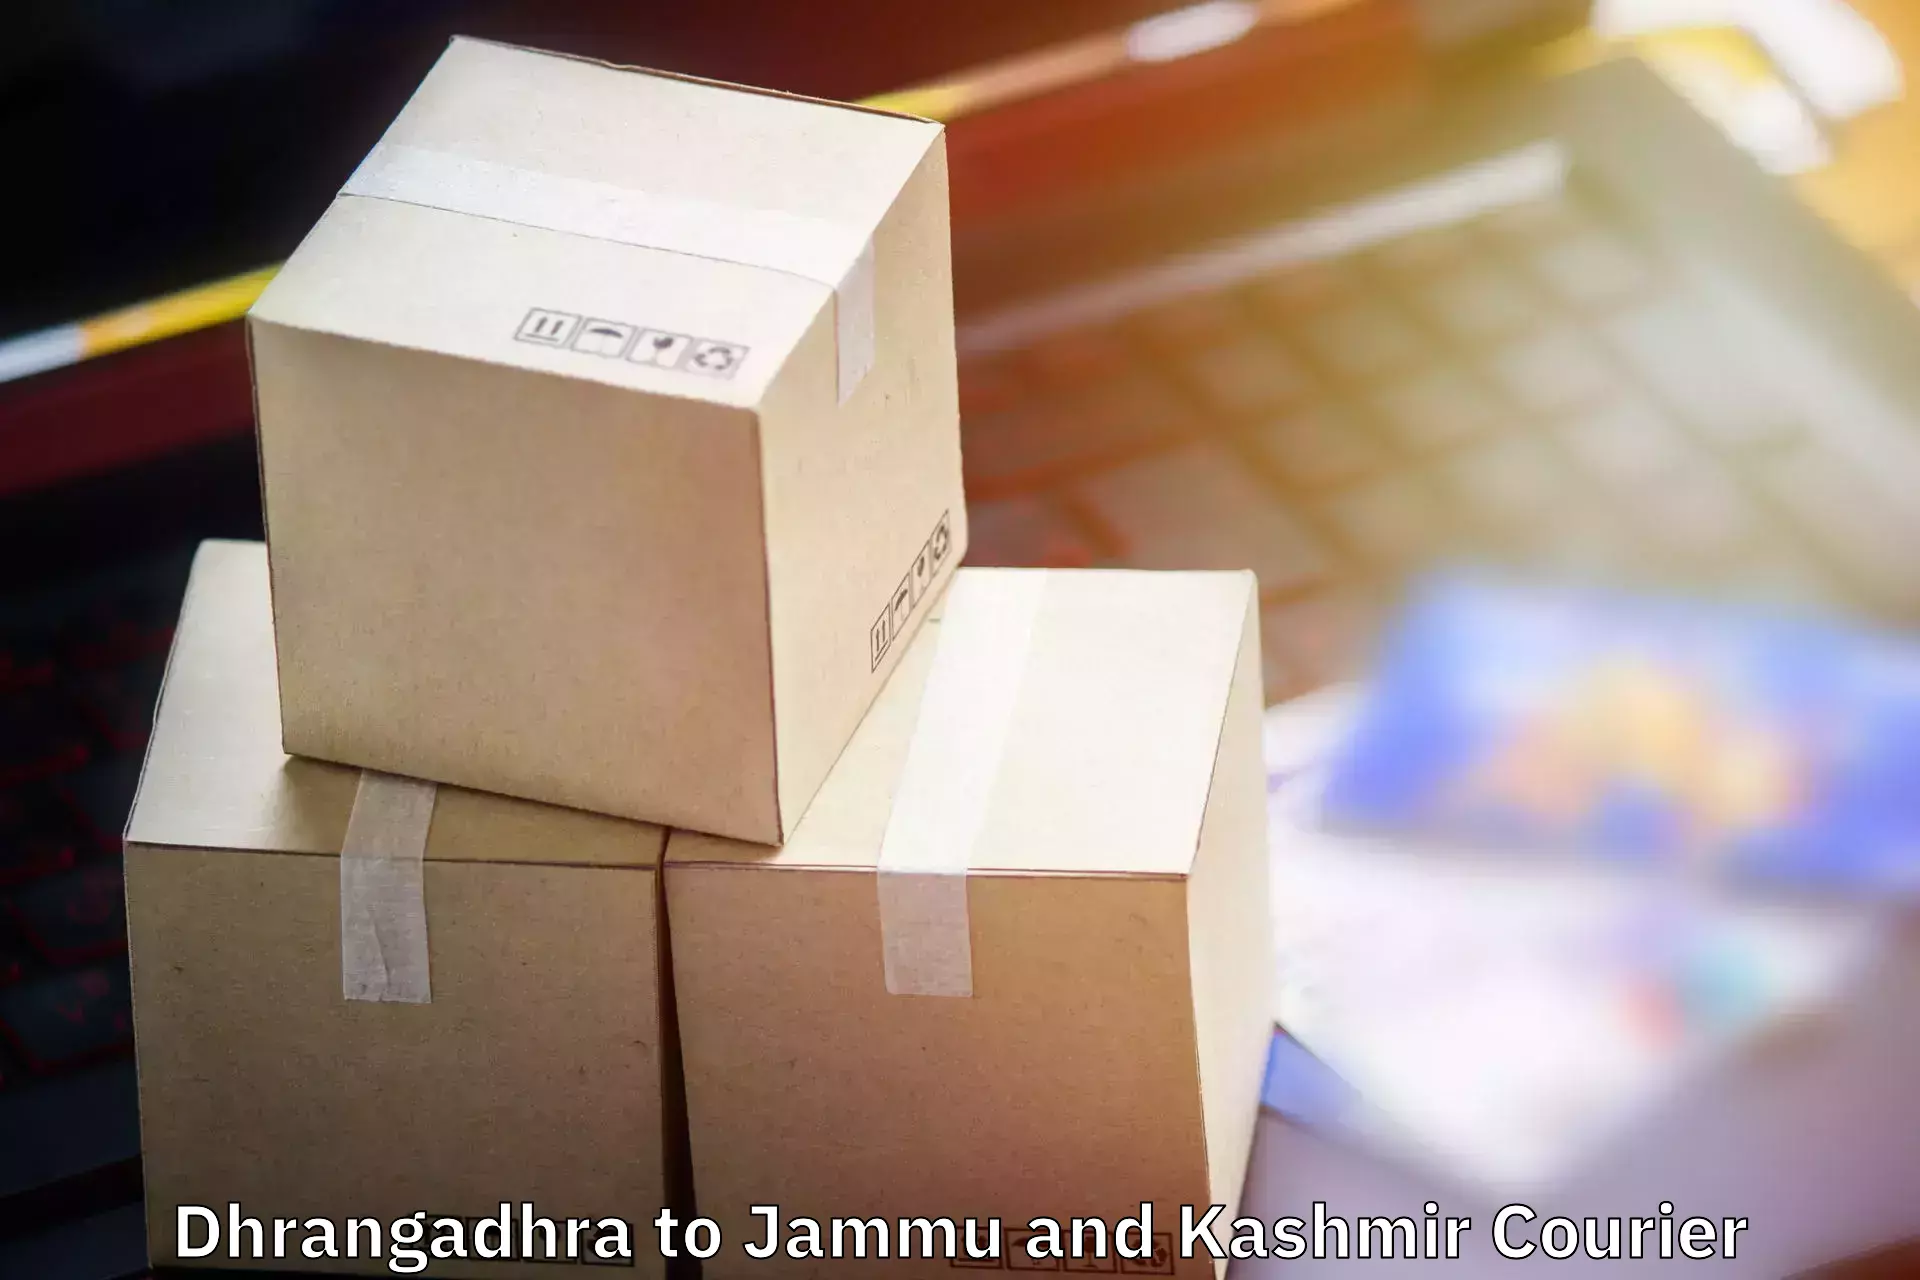 Personal effects shipping Dhrangadhra to Jammu and Kashmir